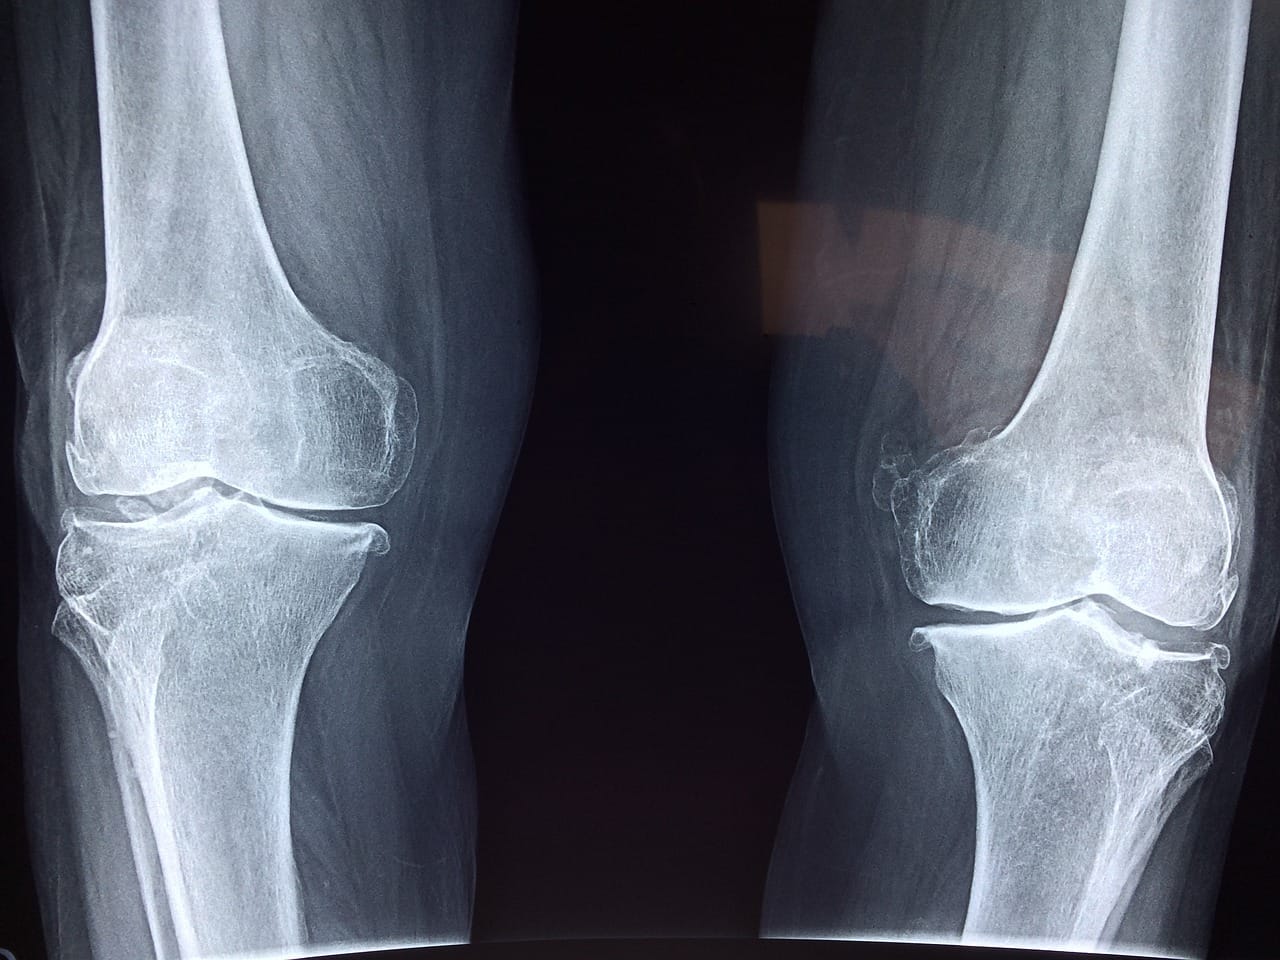 Red Light Therapy For Knee: Devices And Practical Tips